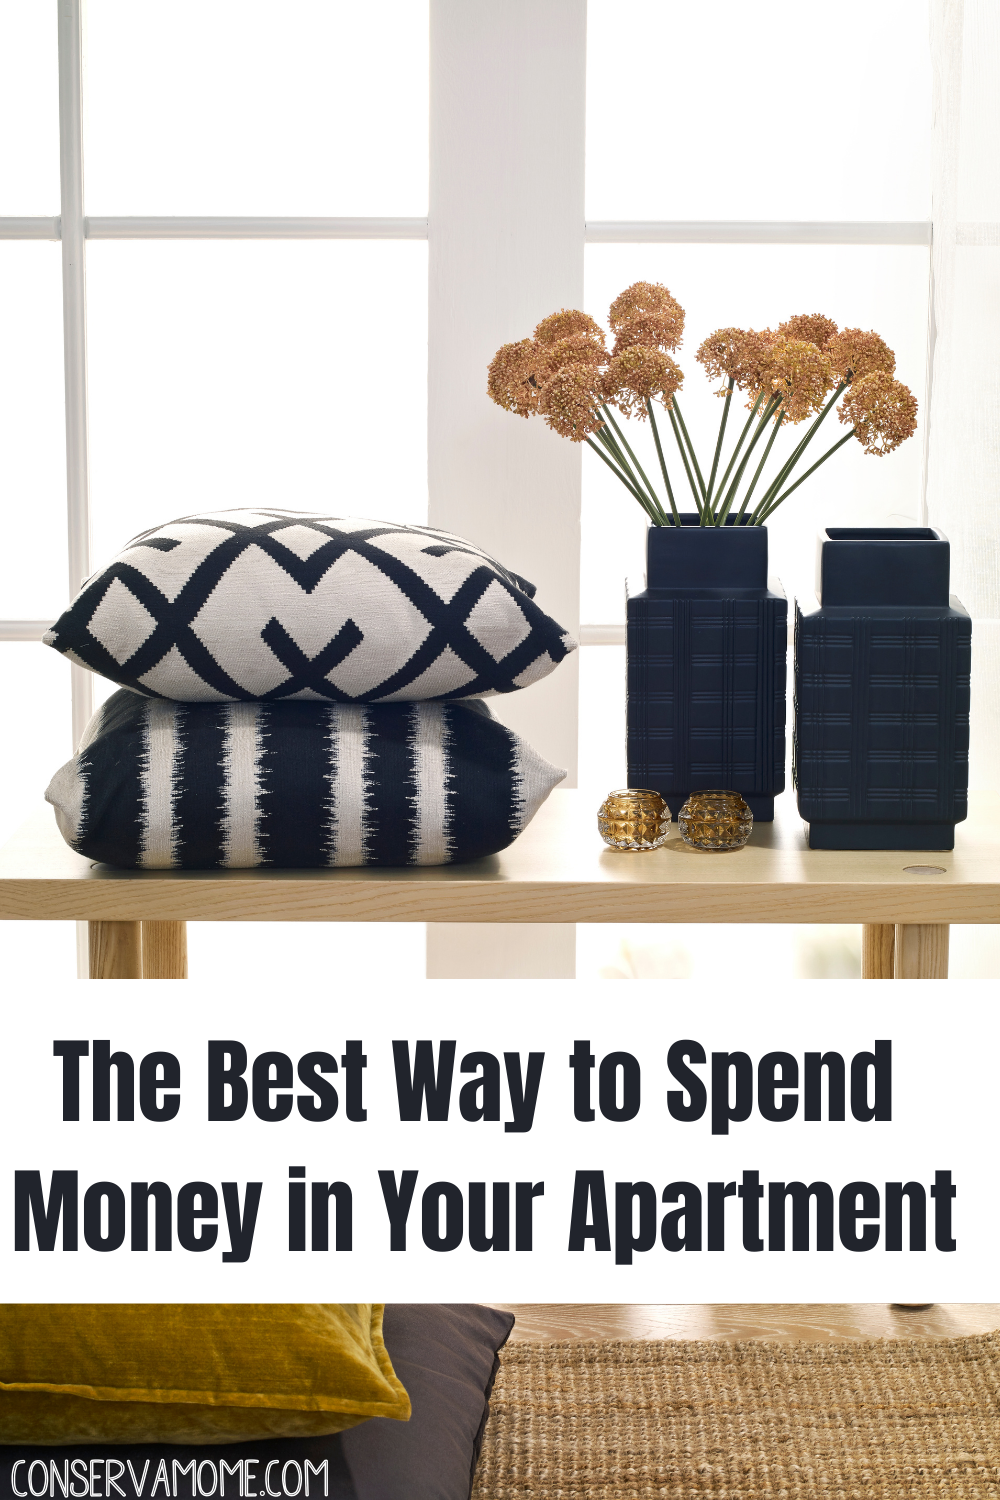 The Best Way to Spend Money in Your Apartment